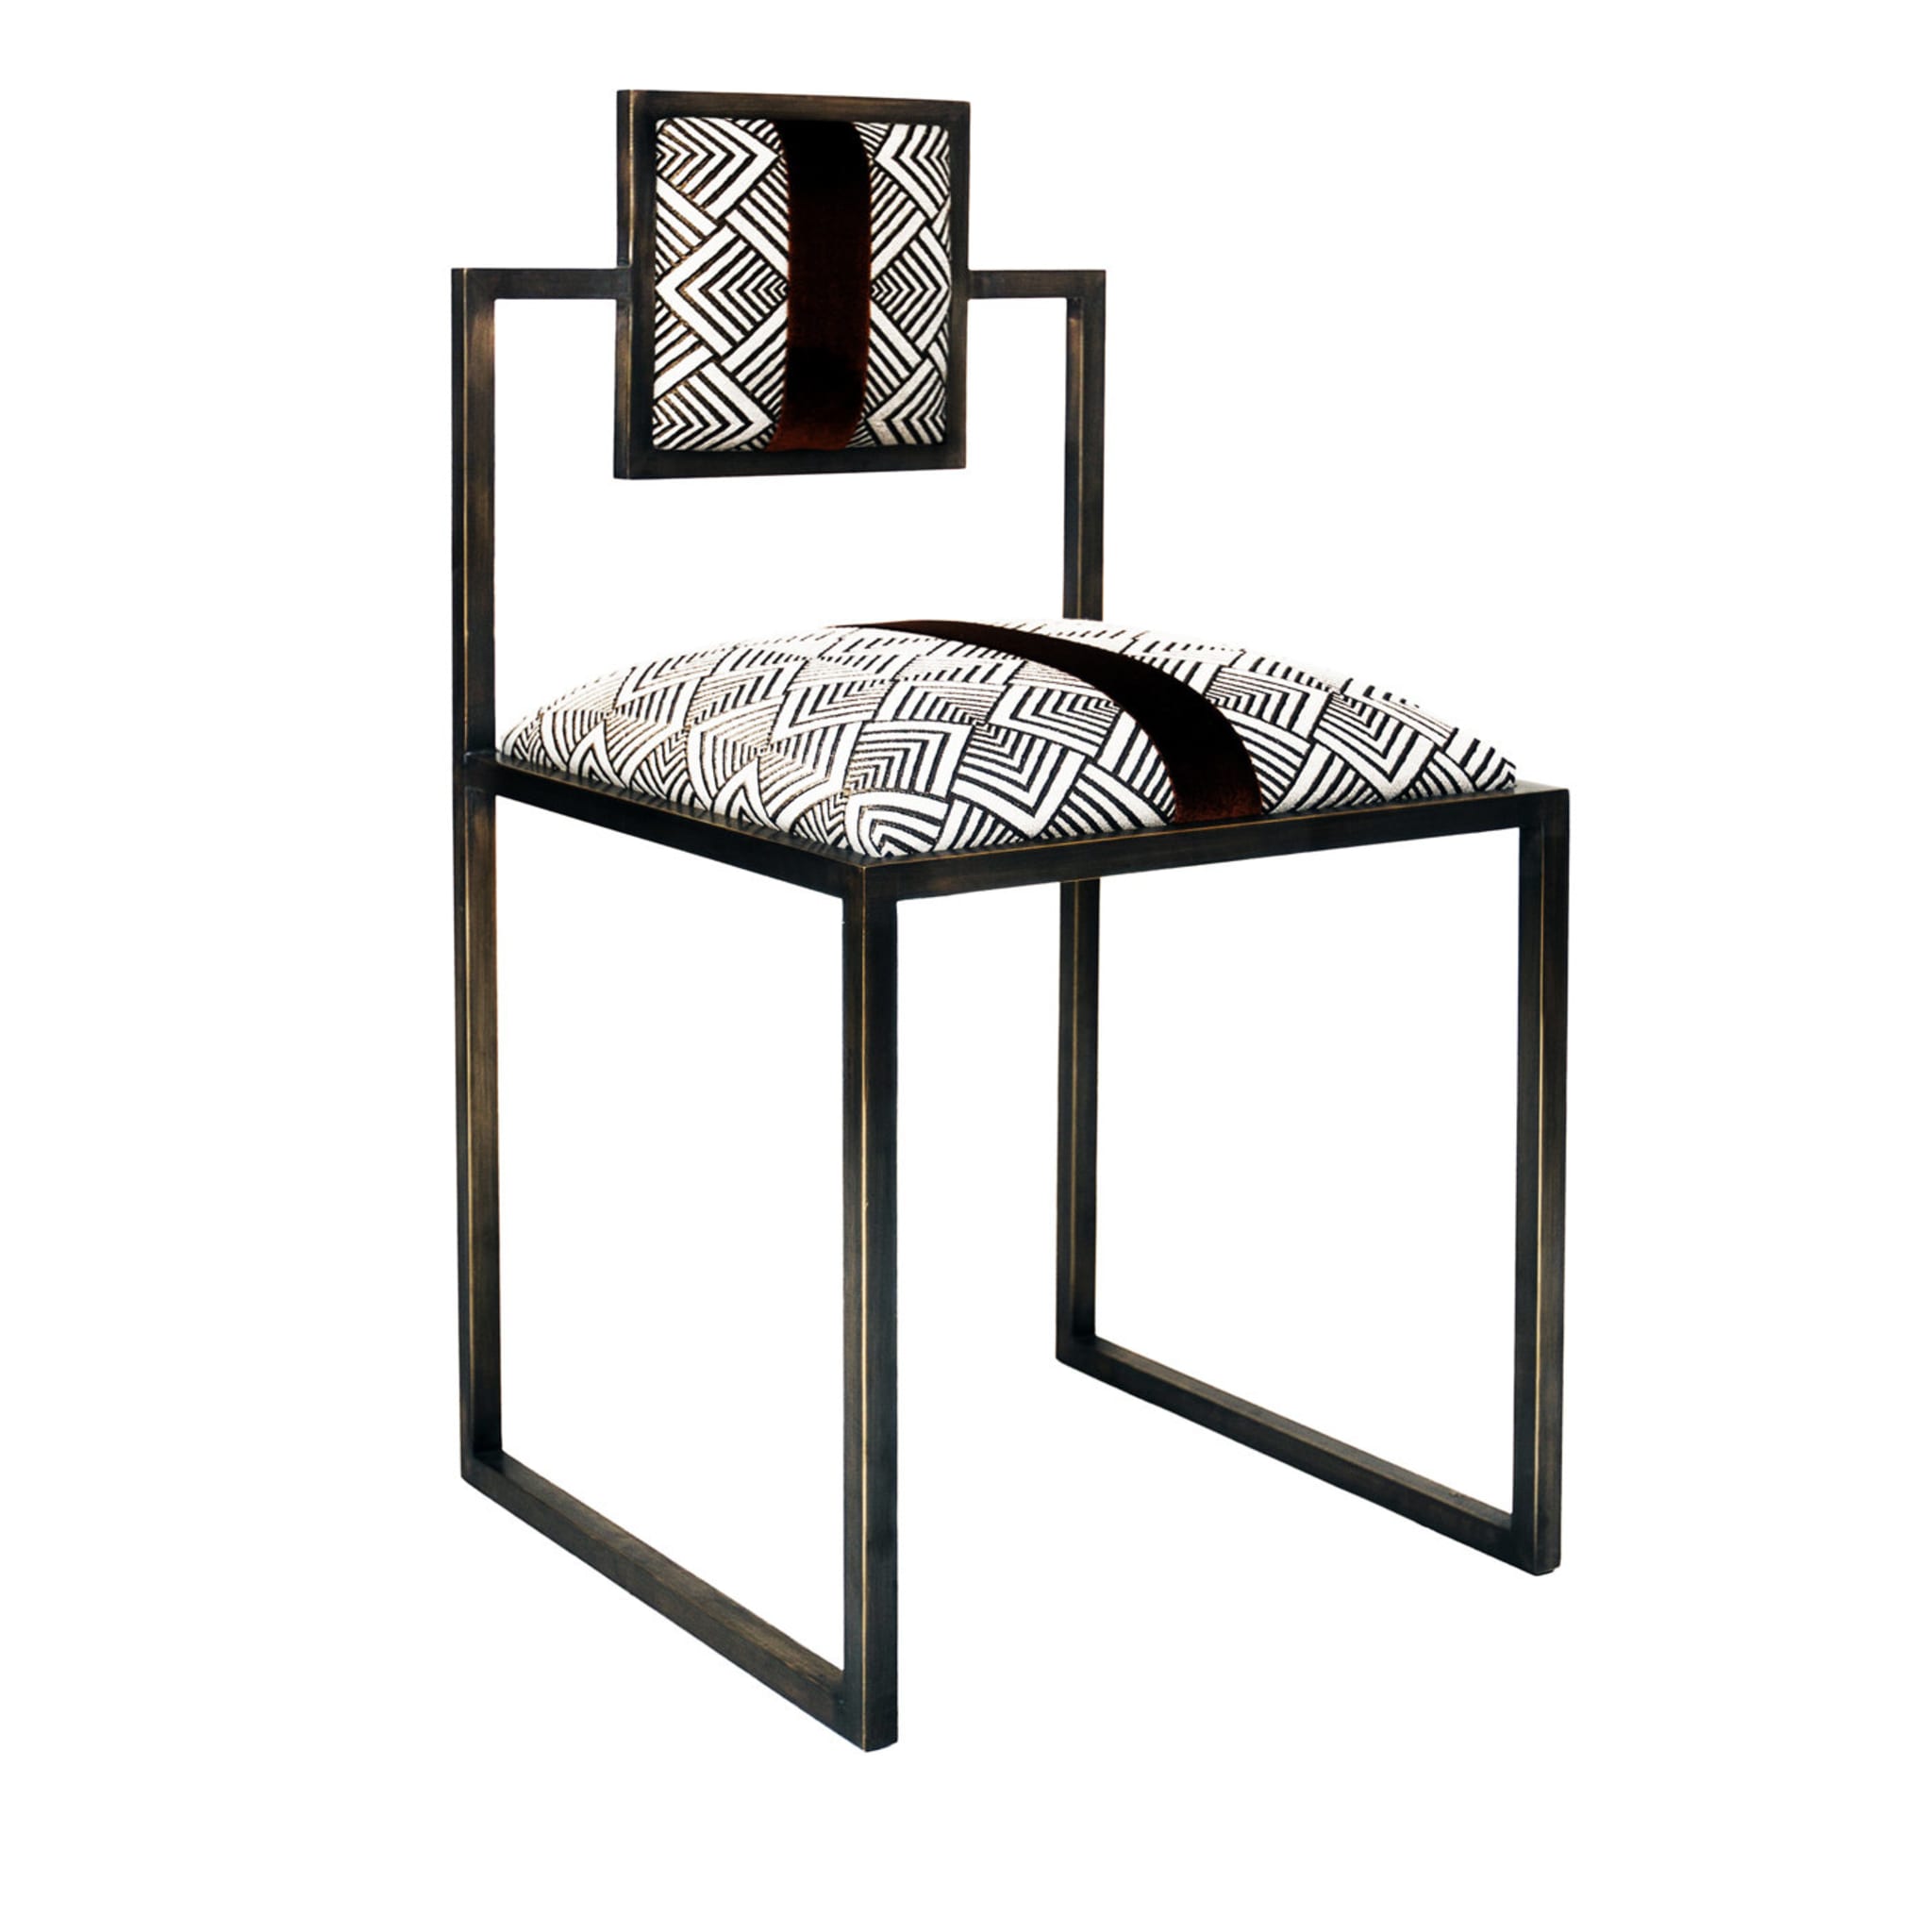 Grigio and Bronze Square Chair - Main view